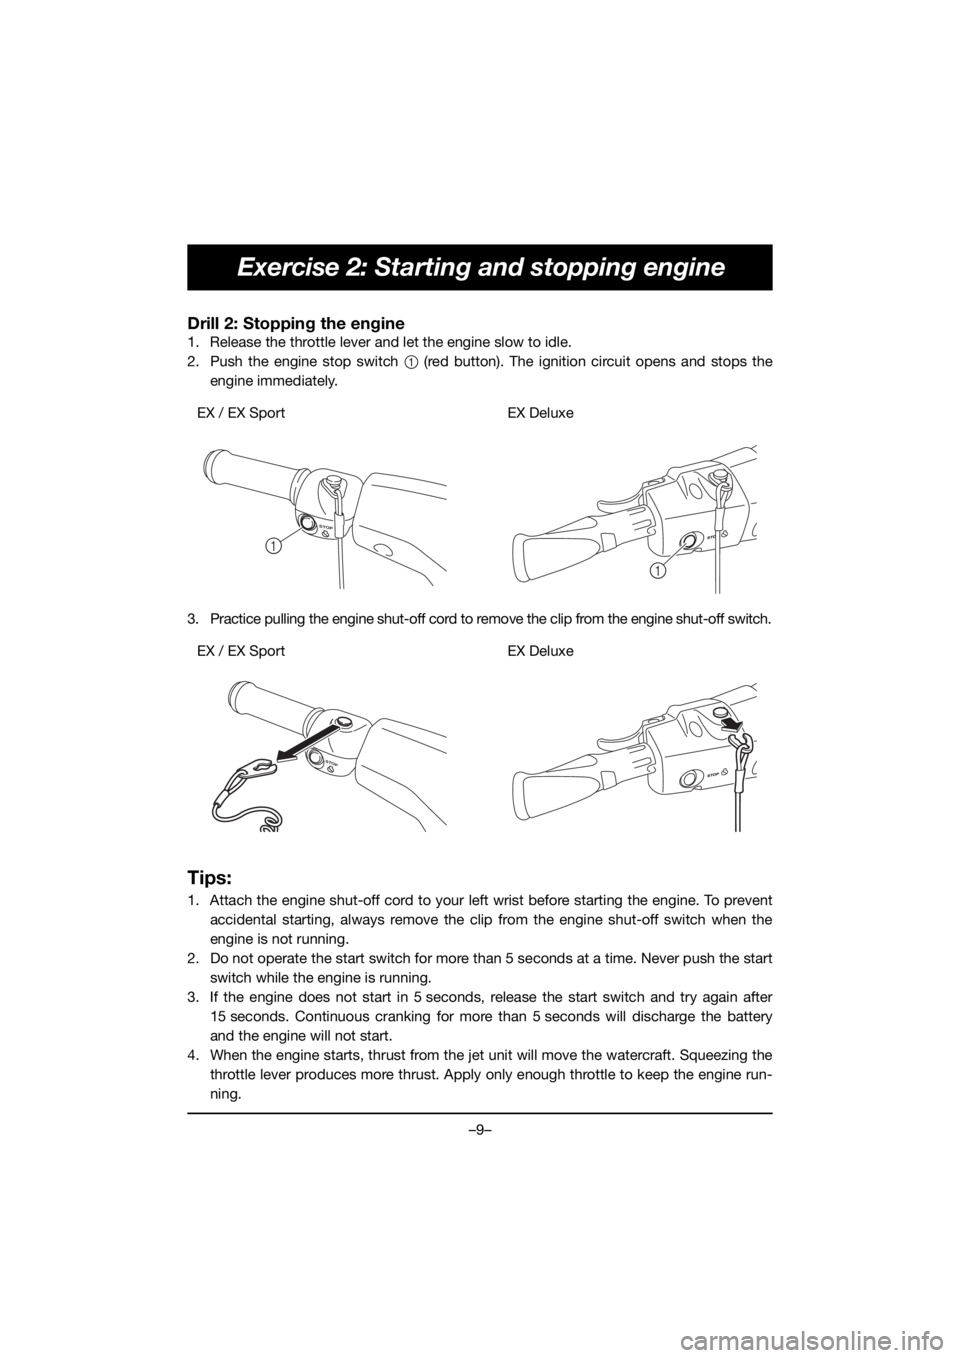 YAMAHA EX SPORT 2020 User Guide –9–
Exercise 2: Starting and stopping engine
Drill 2: Stopping the engine
1. Release the throttle lever and let the engine slow to idle.
2. Push the engine stop switch 1 (red button). The ignition